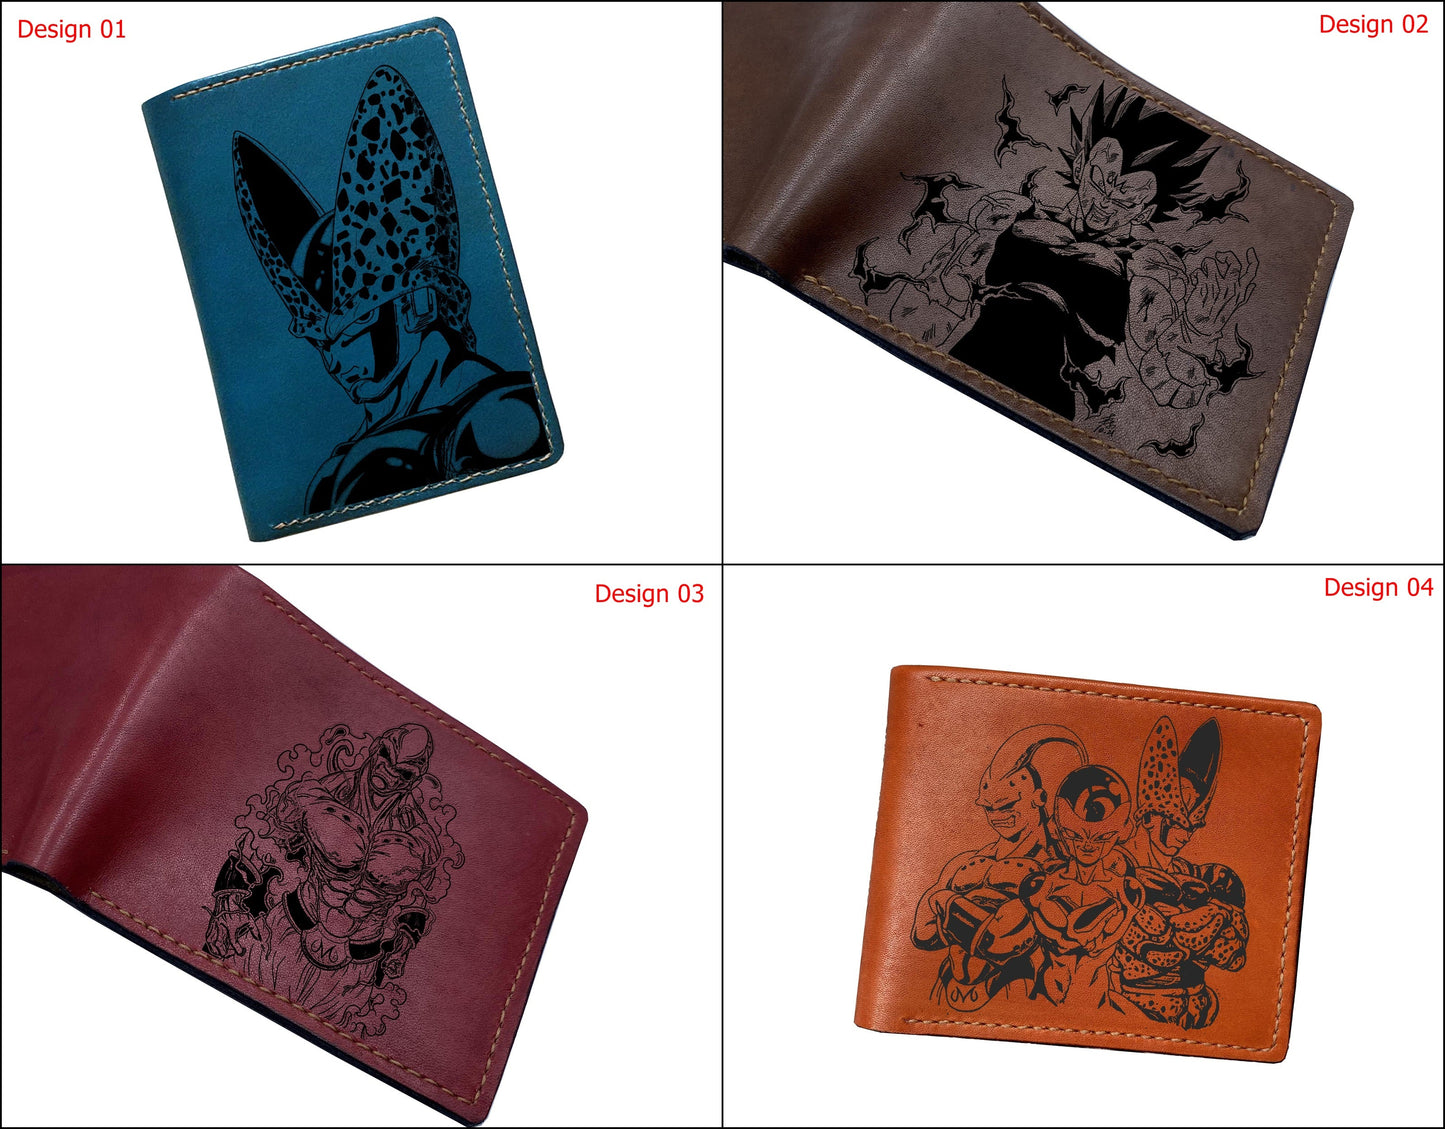 Mayan Corner - Dragon ball characters drawing leather wallet, fan art leather gift for men, wallet for him, leather anniversary present ideas - Super Villains monster